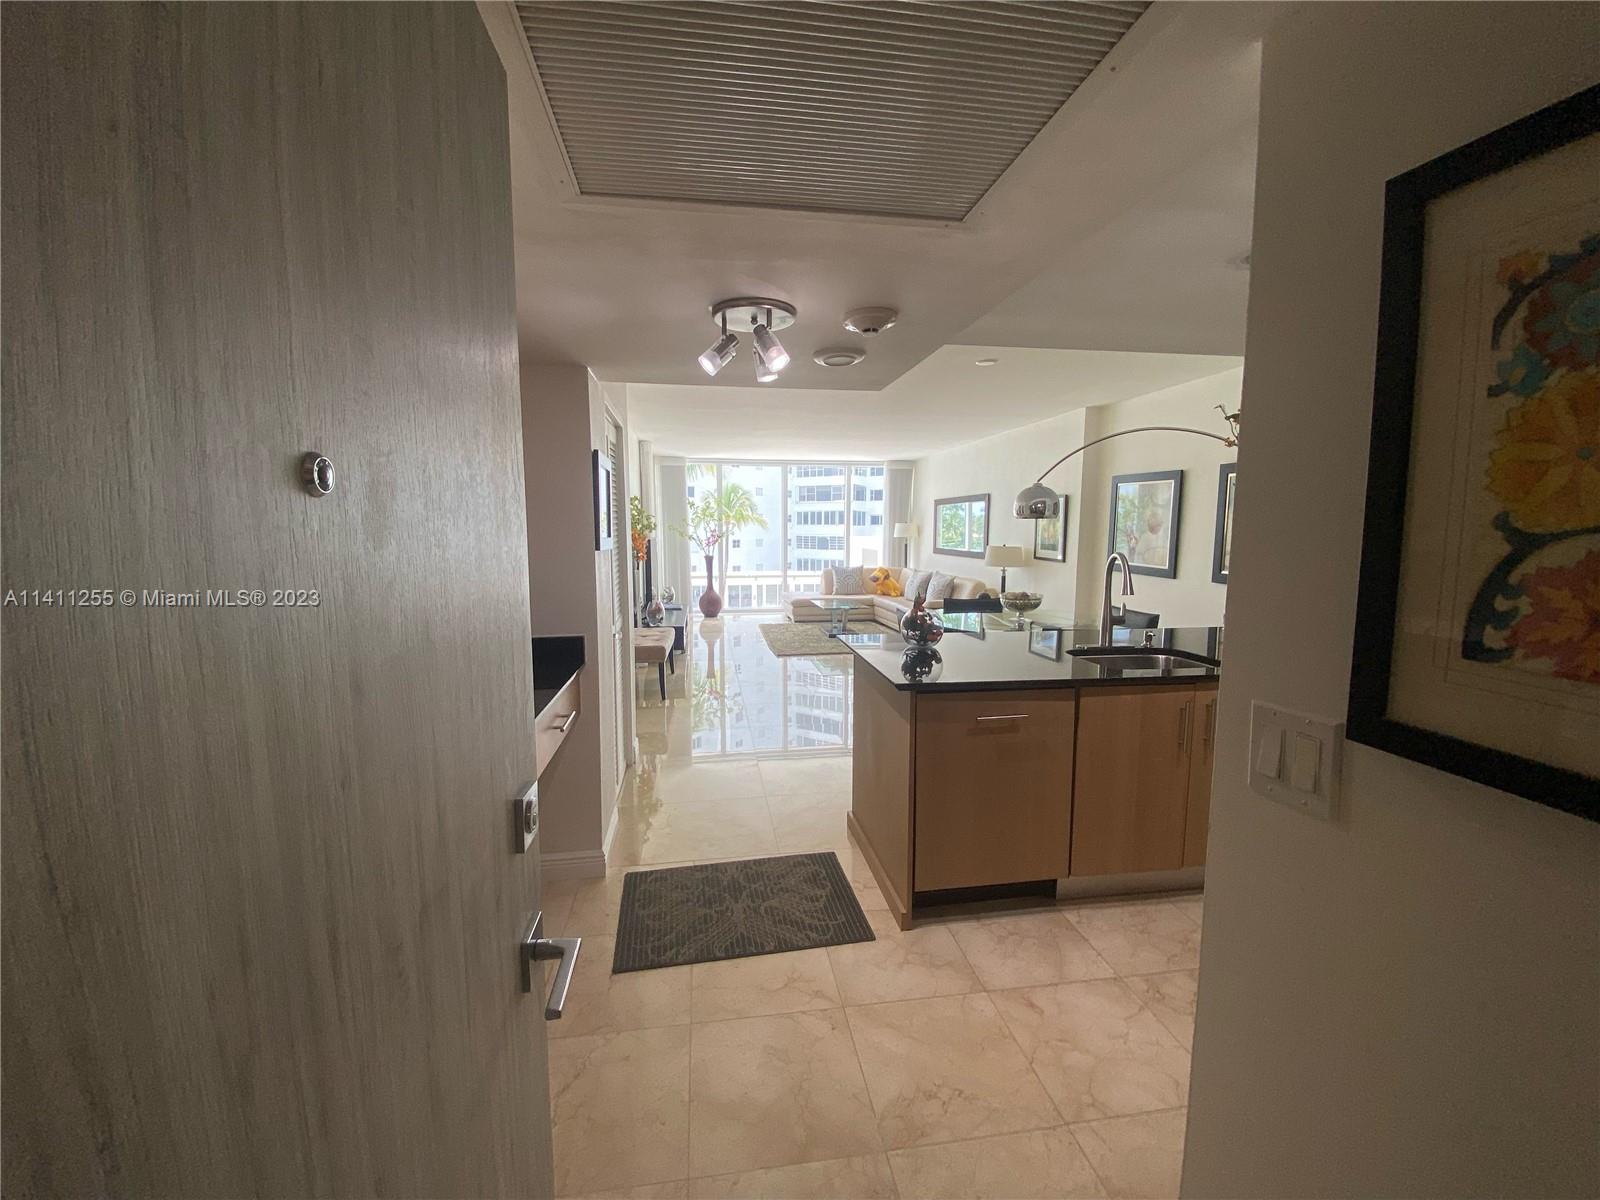 Beautiful oceanfront building in the best luxurious neighborhood. Gorgeous unit with nice living room, beautiful Kitchen with eat-in counter, 1 specious bedroom with walking closet, Master bathroom and 1/5 Bath. Unit was been tasteful FURNISHED. Tile floor throughout the unit with beautiful balcony to enjoy your morning coffee with an amazing pool and ocean view. Washer and Dryer in unit. 1 Assigned parking. 5 star building feature party room, Jacuzzi, Spa, Poolside grills, 24/7 concierge, lavish pool & hot tub deck, gourmet market, movie theater, gym & private beach services. Next to the Ritz Carlton, Bal Harbour shops and Upscale restaurants. Just bring your tooth Brush. . Please text listing agent for showings !!!